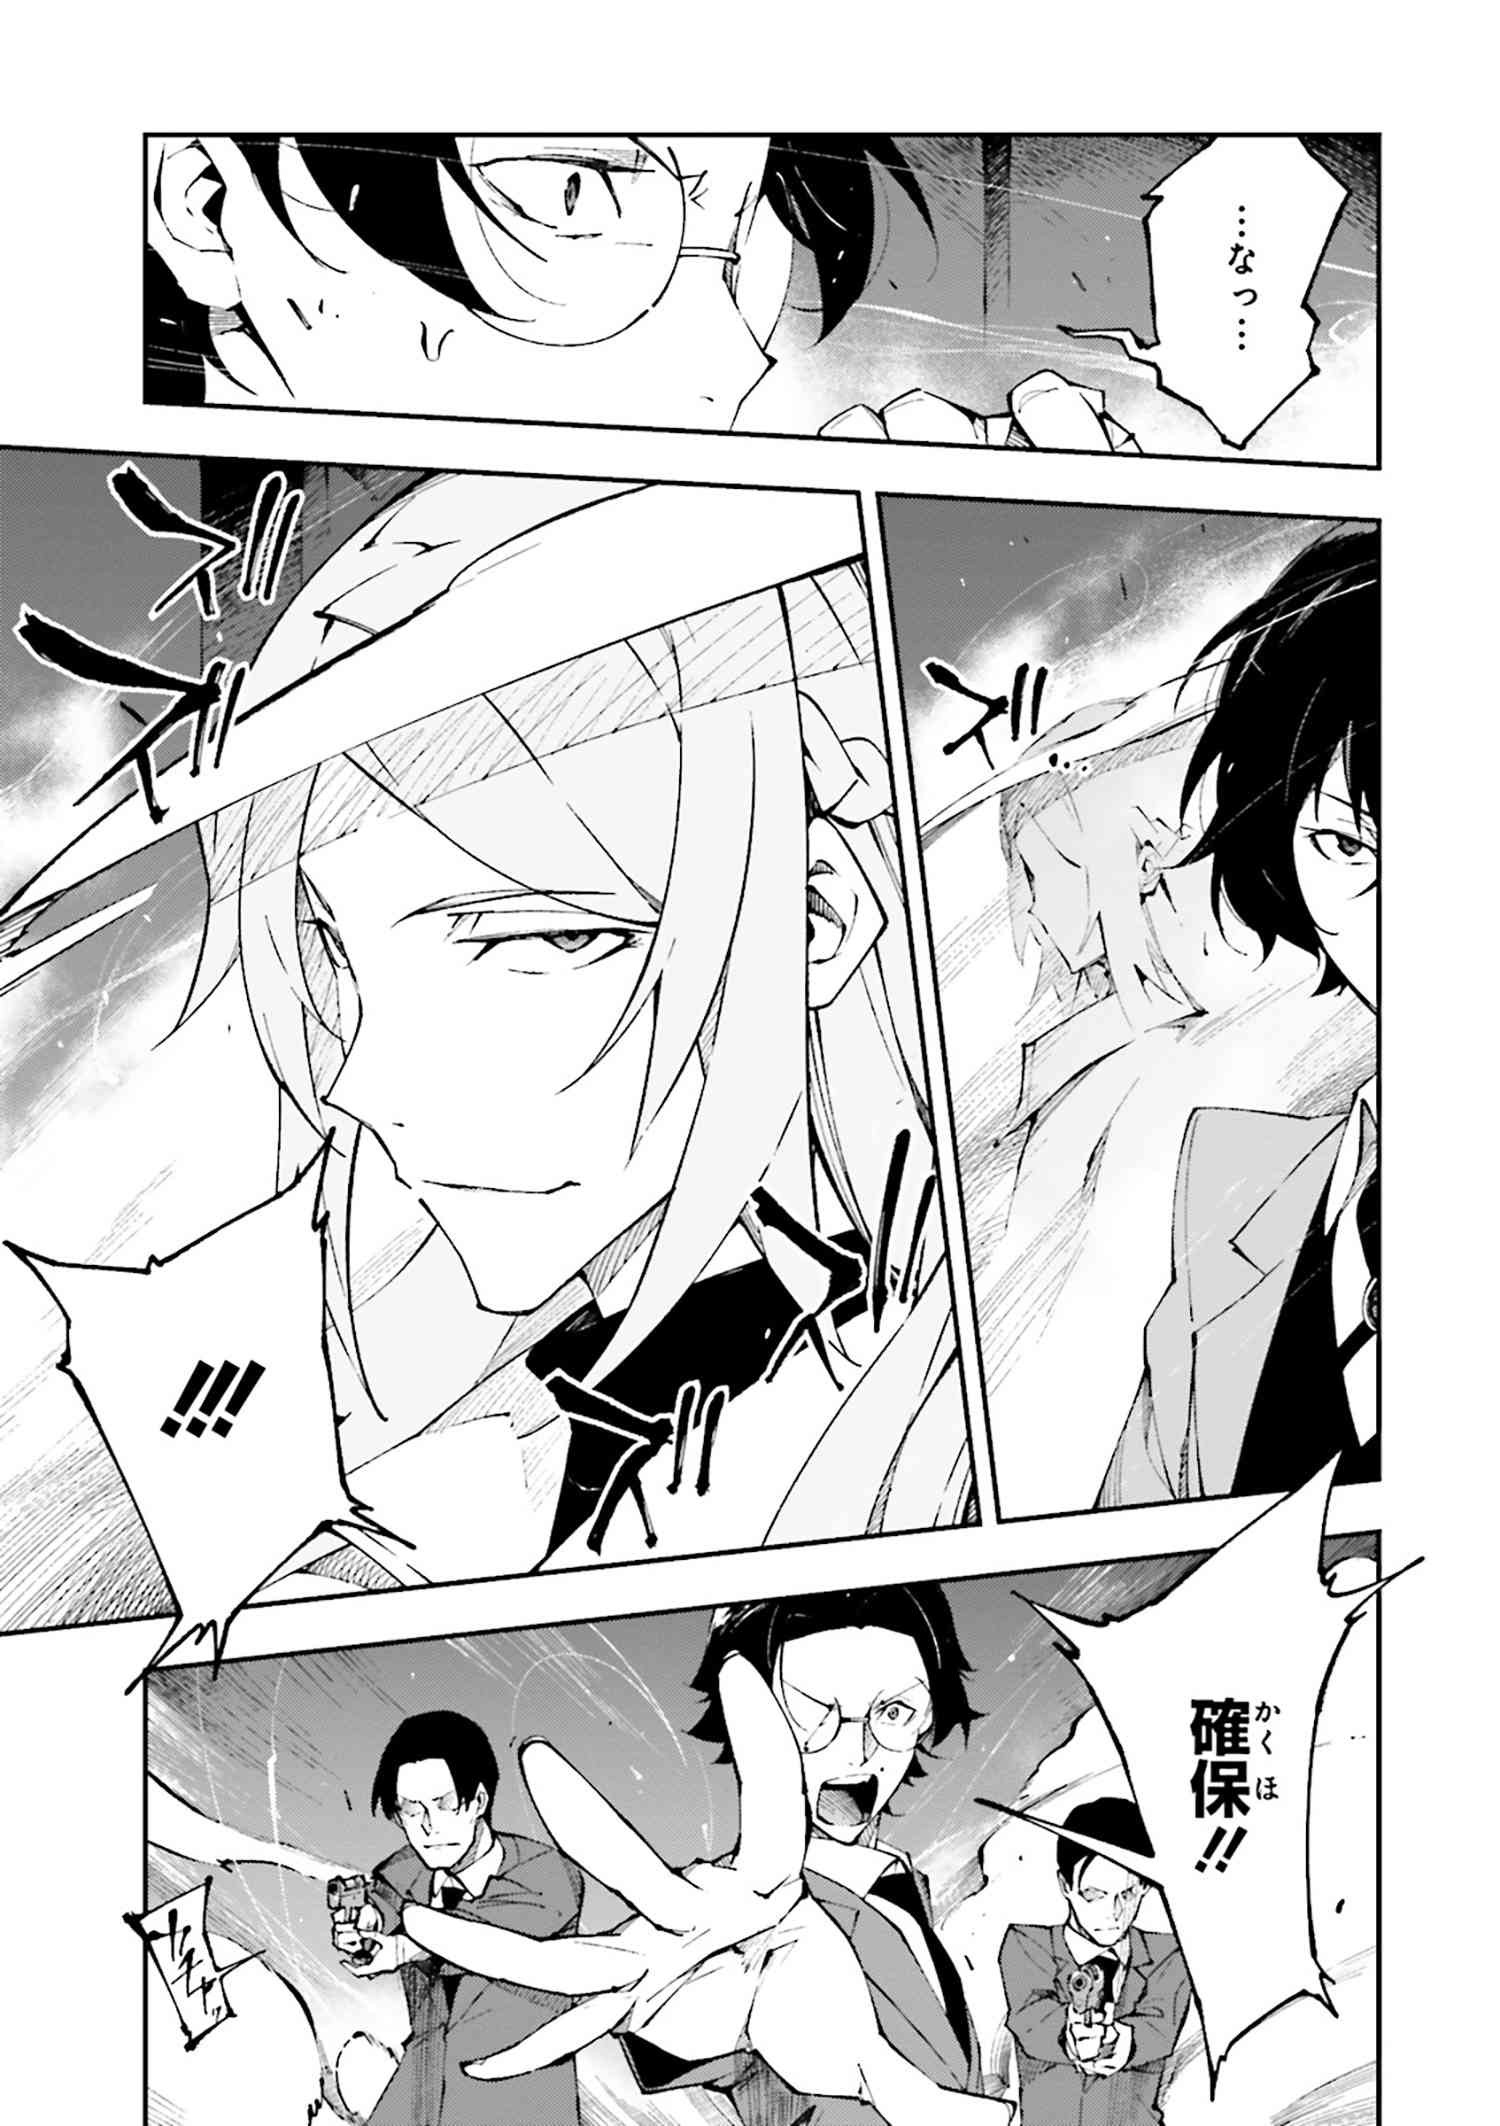 Bungou Stray Dogs: Dead Apple - Chapter 1-2 - Page 26